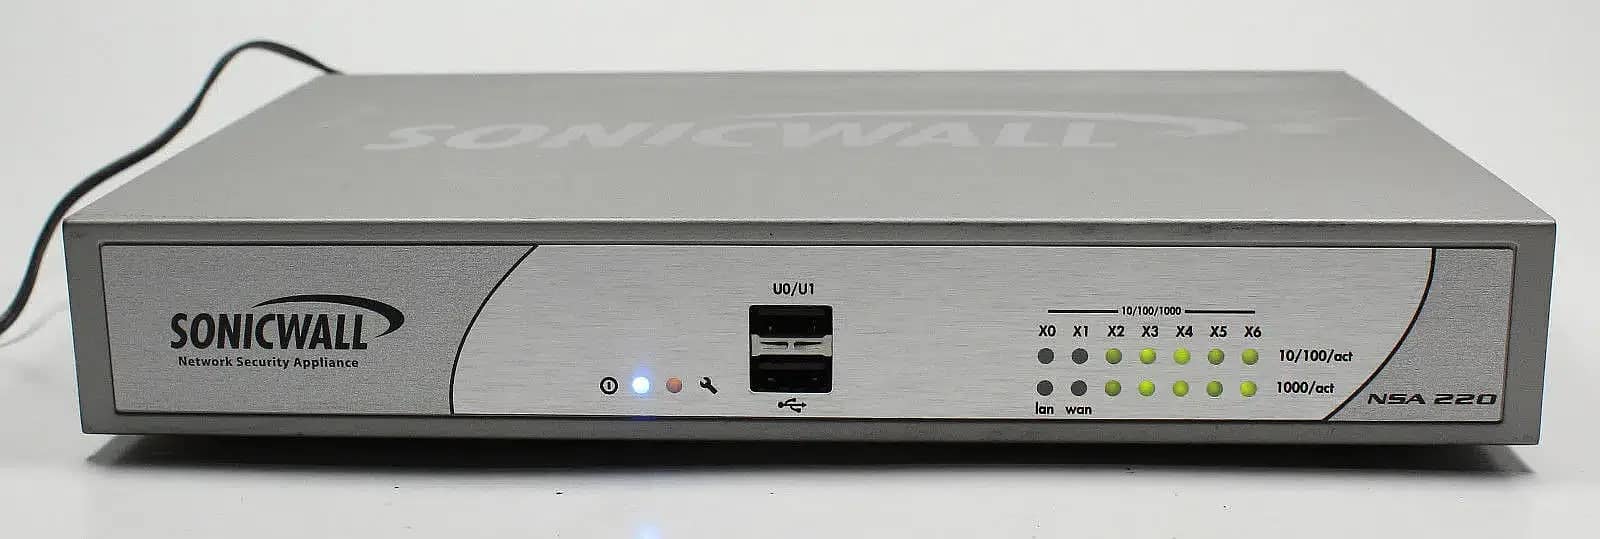 Sonicwall/NSA/220/Network Security Appliance(Branded Used) 1